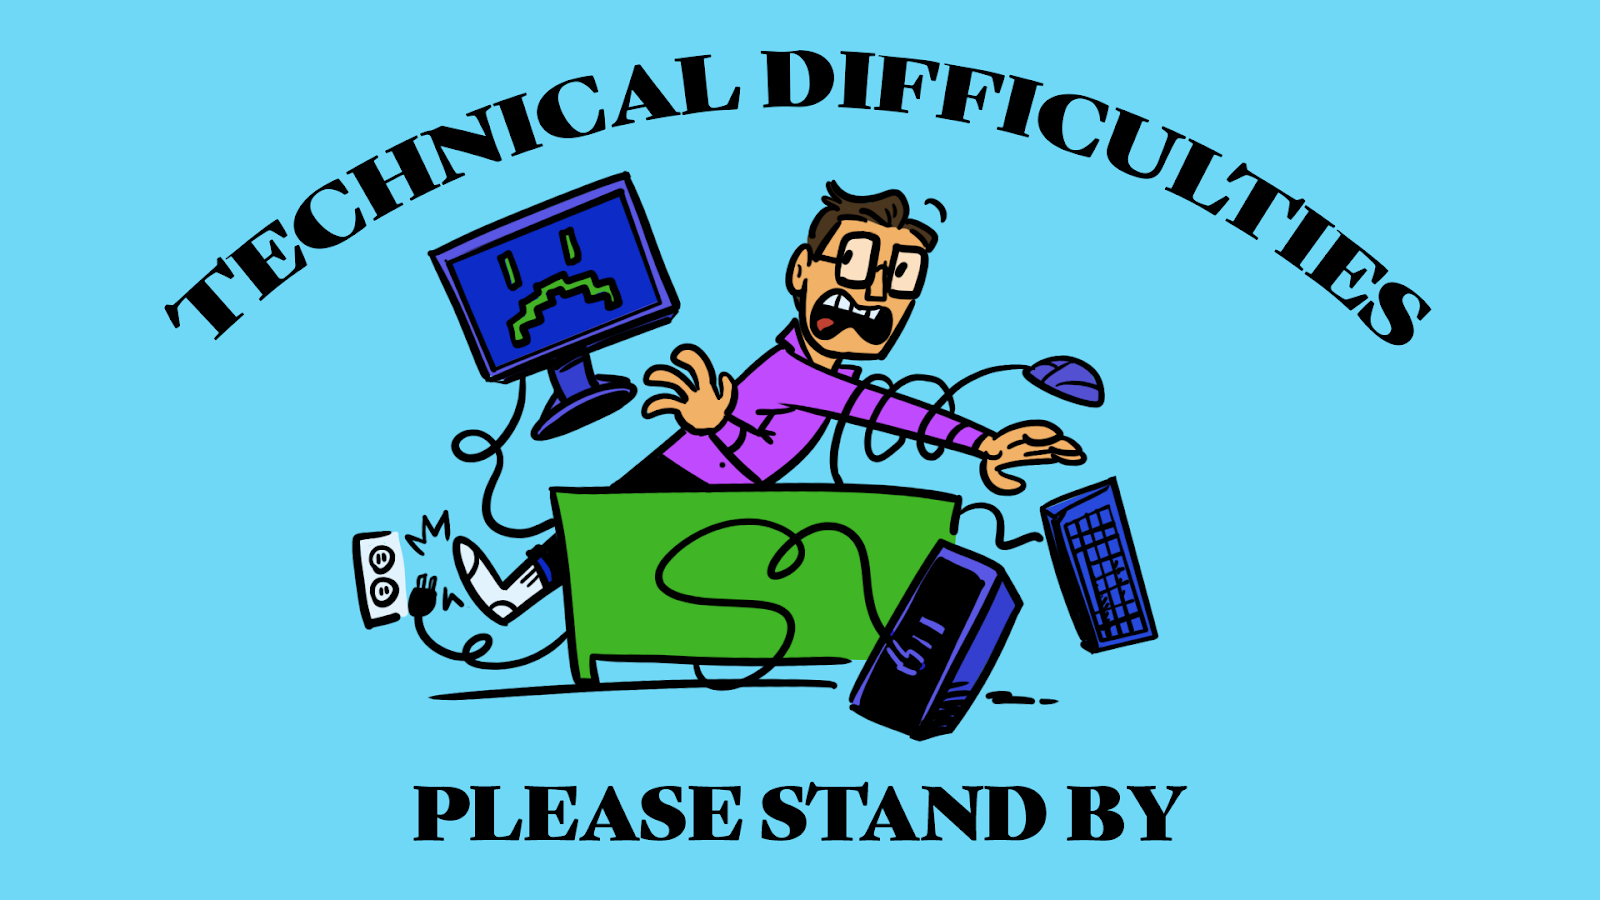 TechnicalDifficulties-1.png